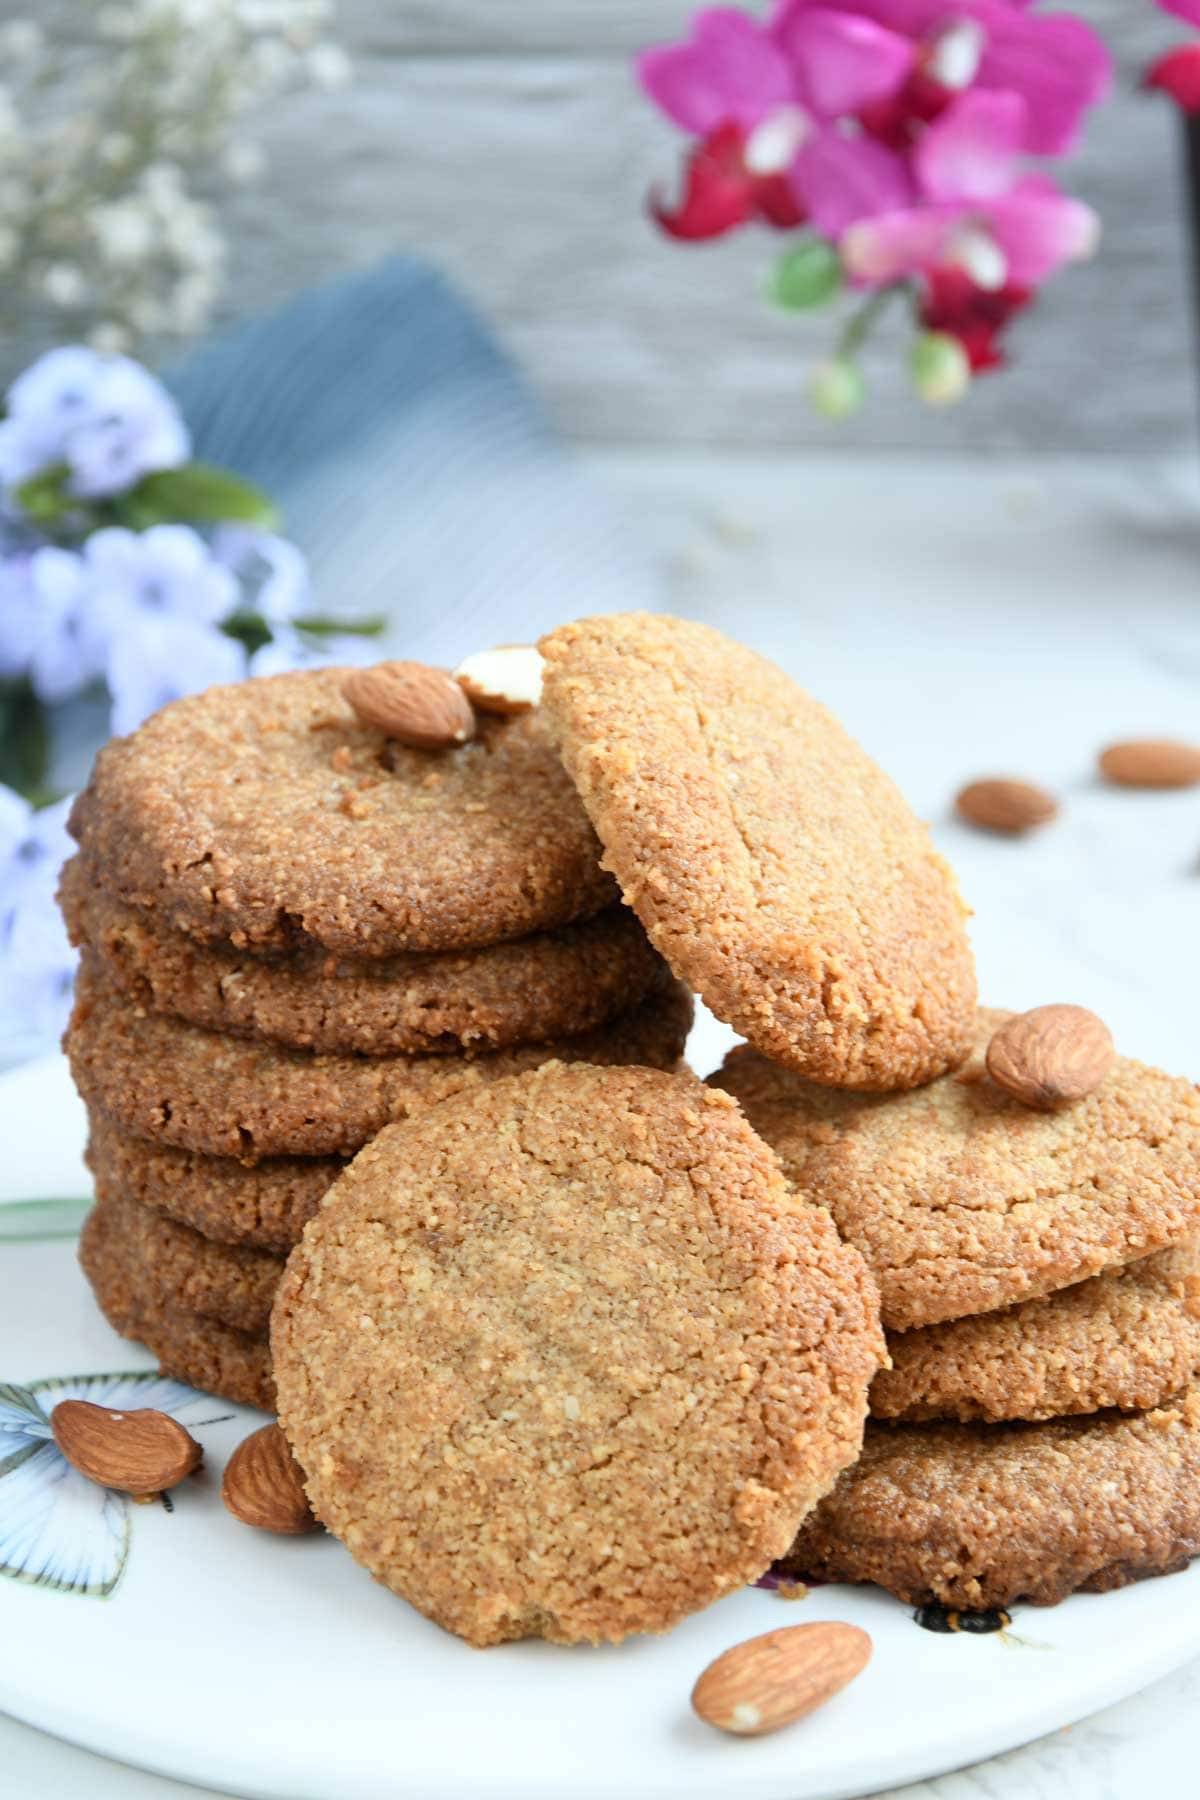 Almond flour peanut butter cookies stacked on a plate.